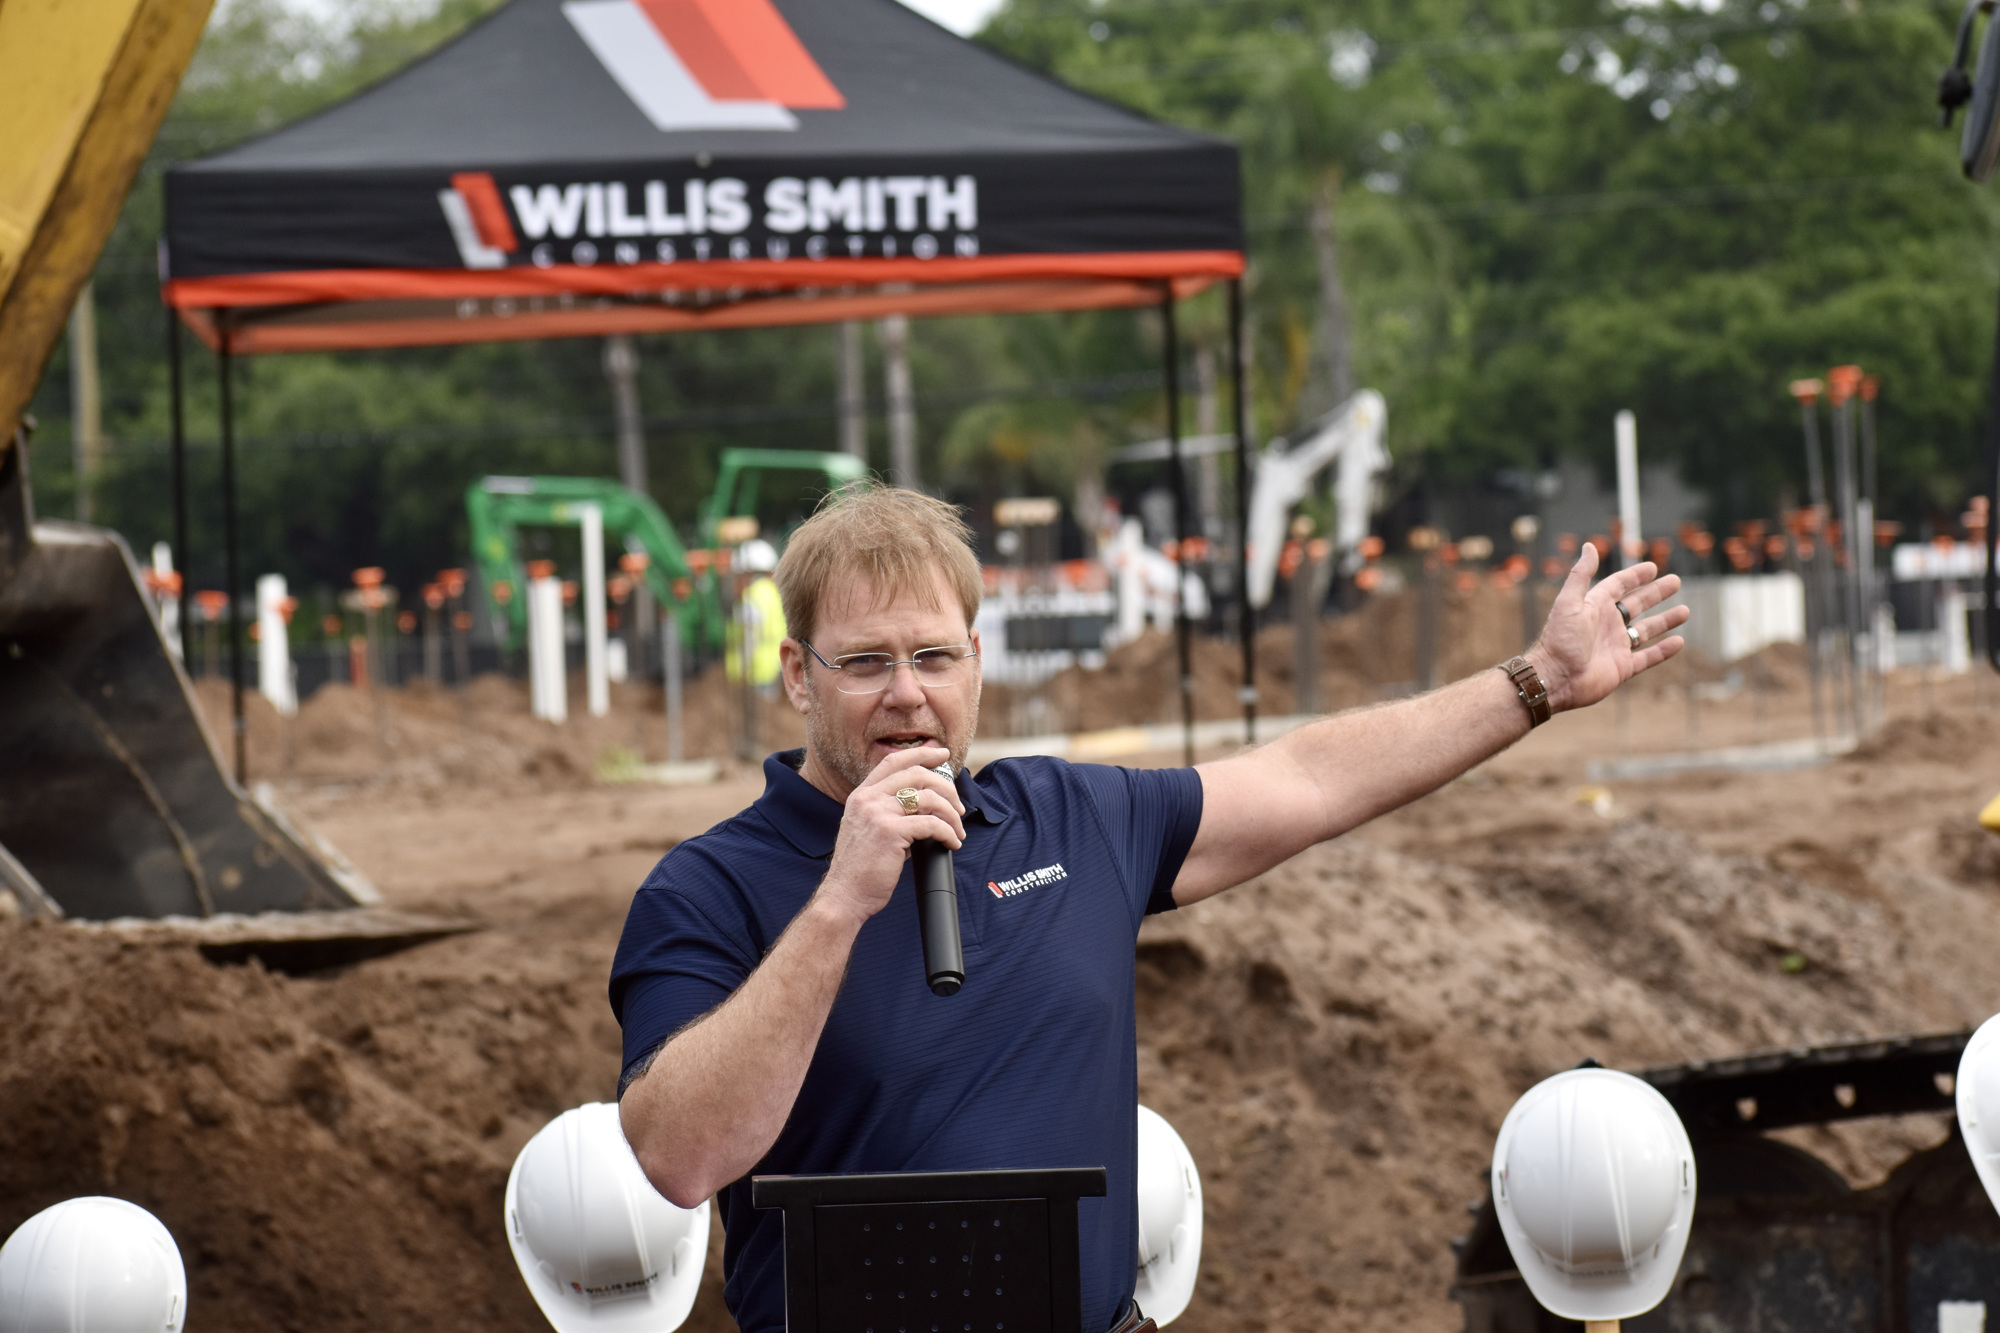 John LaCivita of Willis Smith Construction speaks to the gathered crowd at Thursday's ceremony. (File photo)